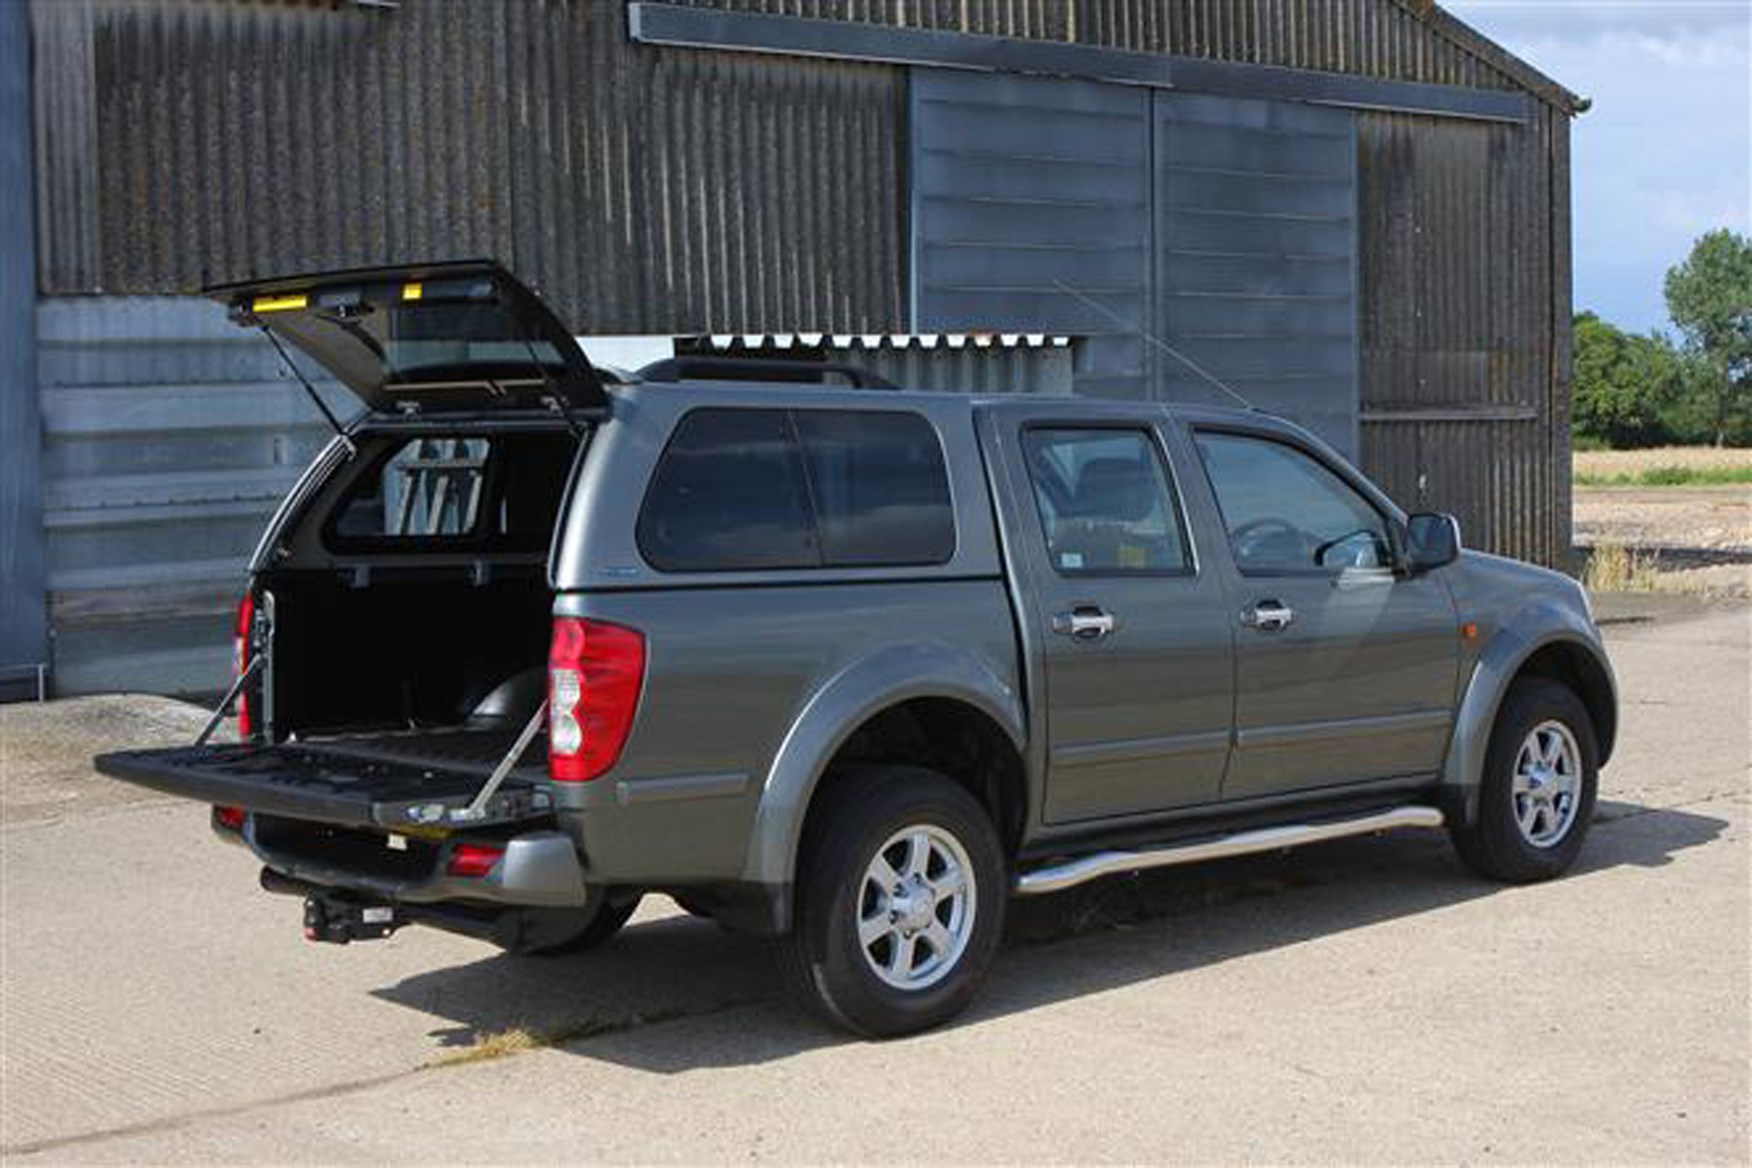 Great Wall Steed full review on Parkers Vans - load area capacity